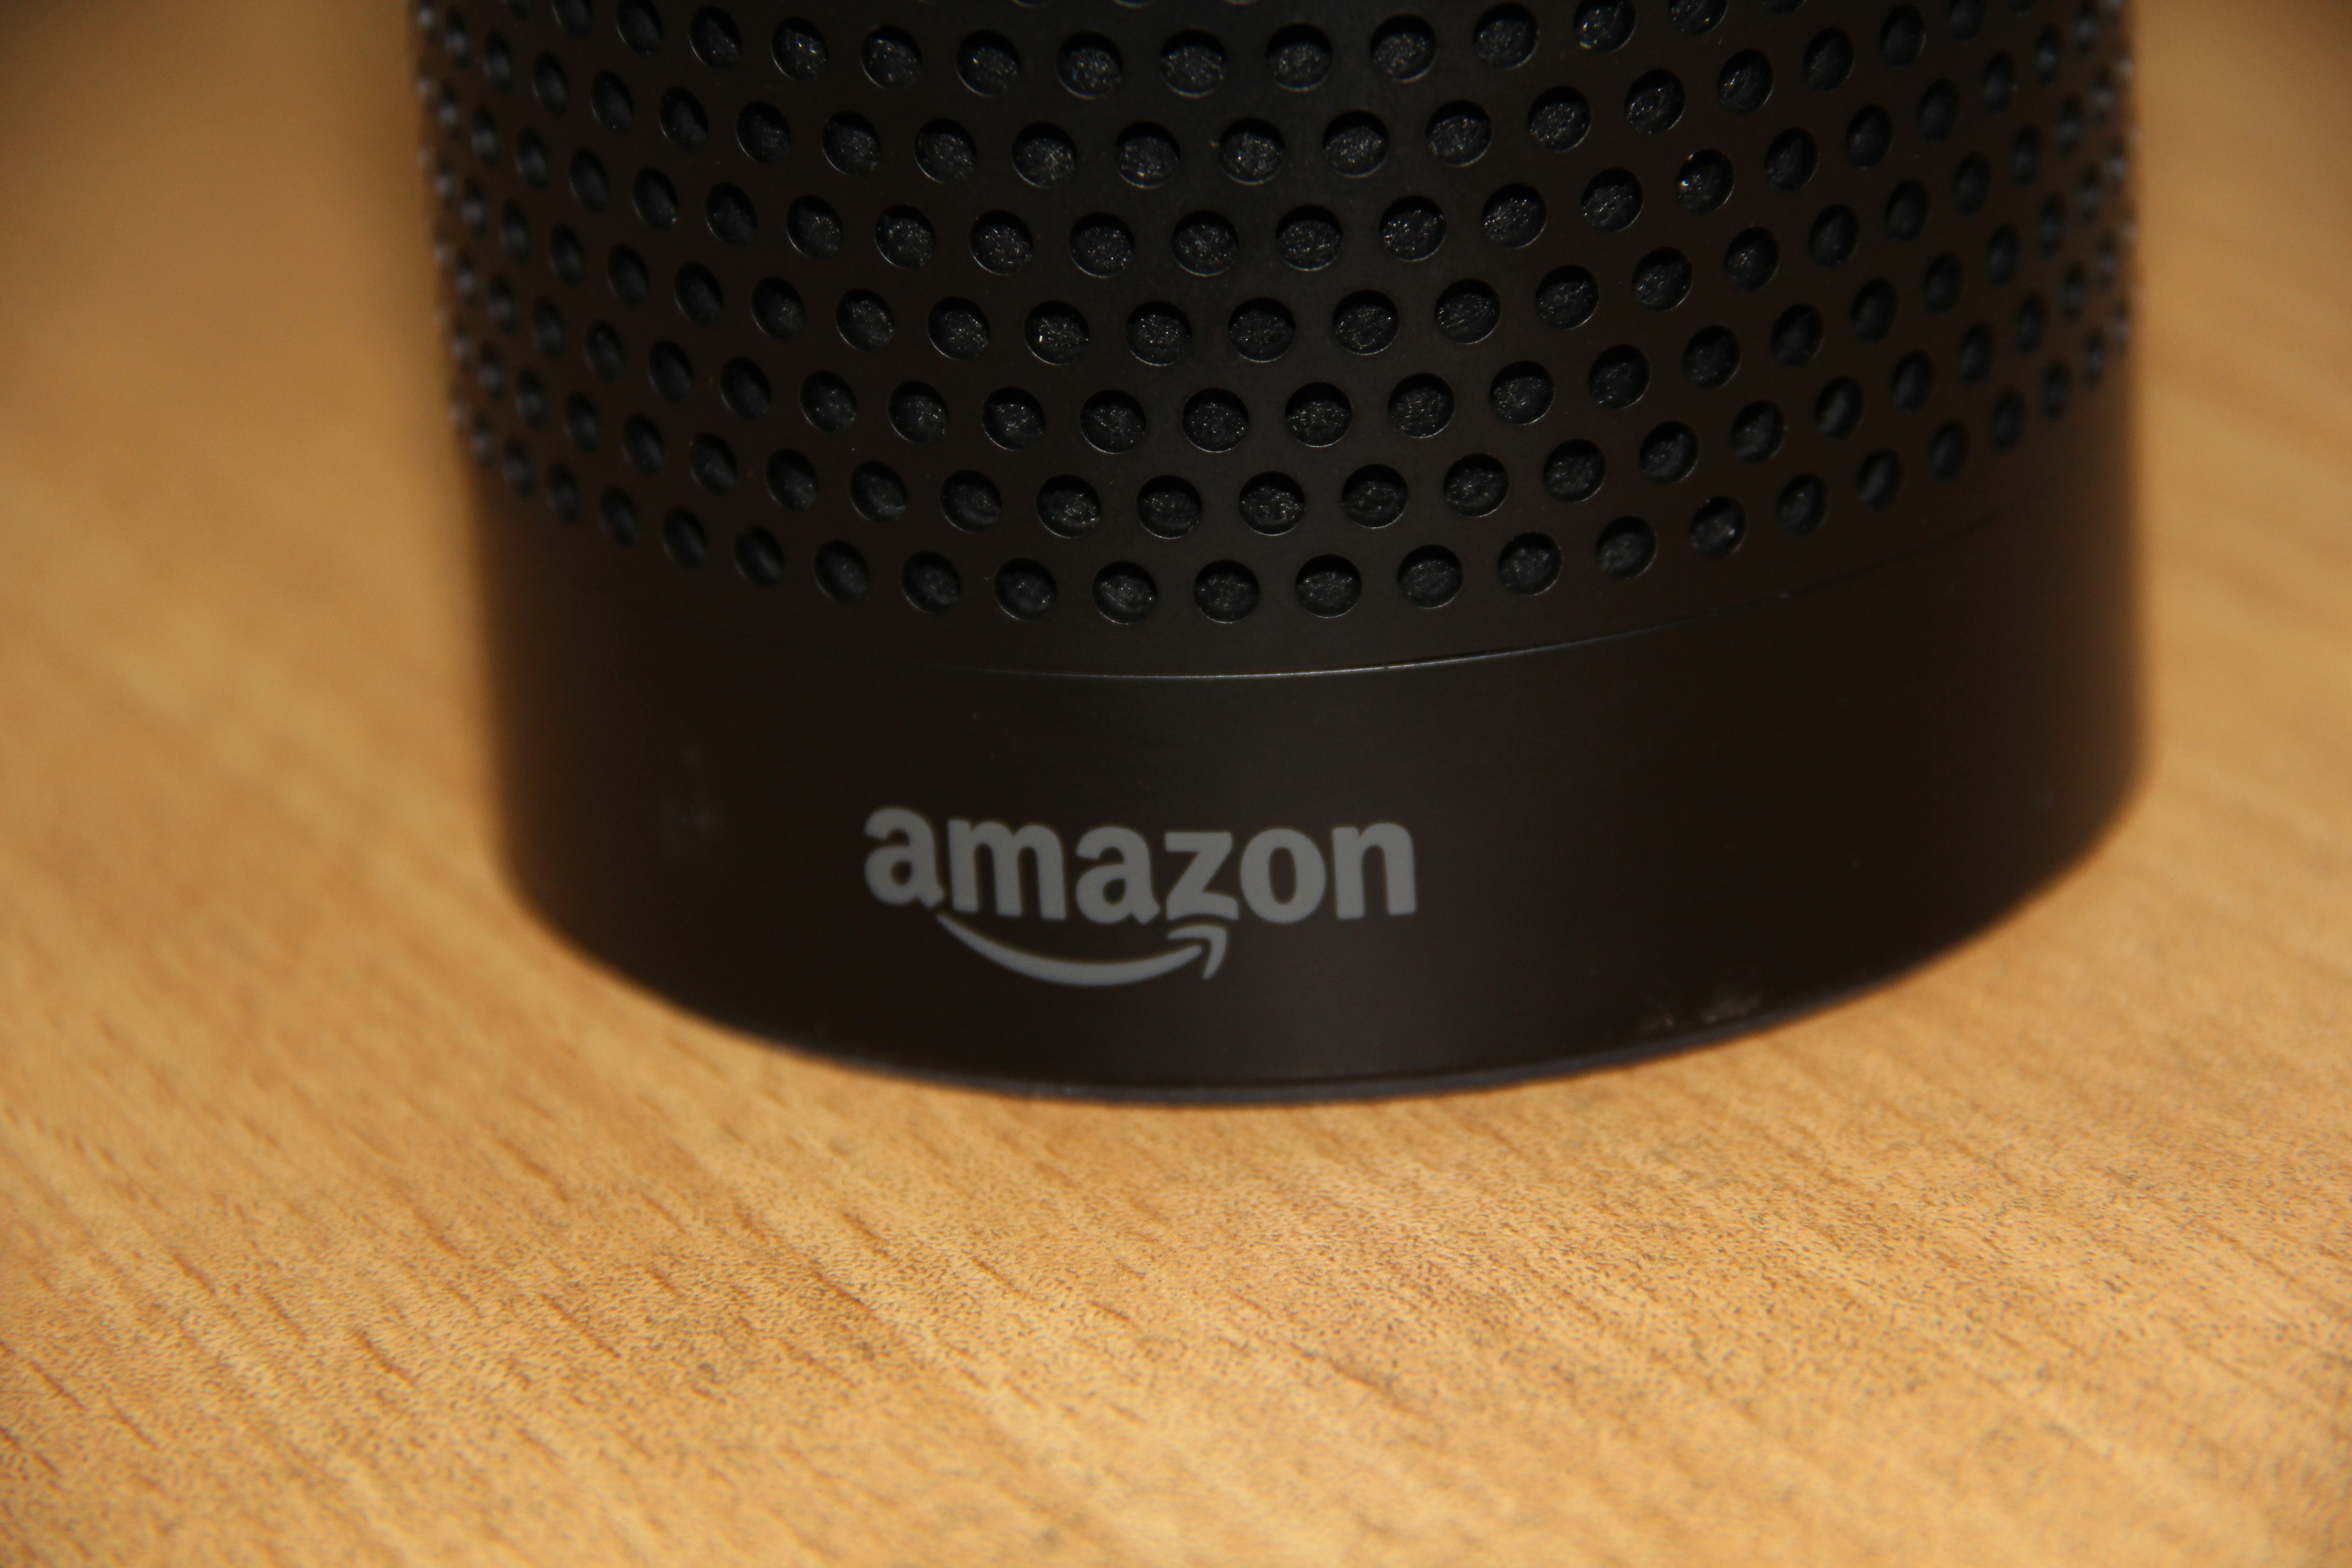 Lawsuits claim Amazon&#8217;s Alexa recording children without consent